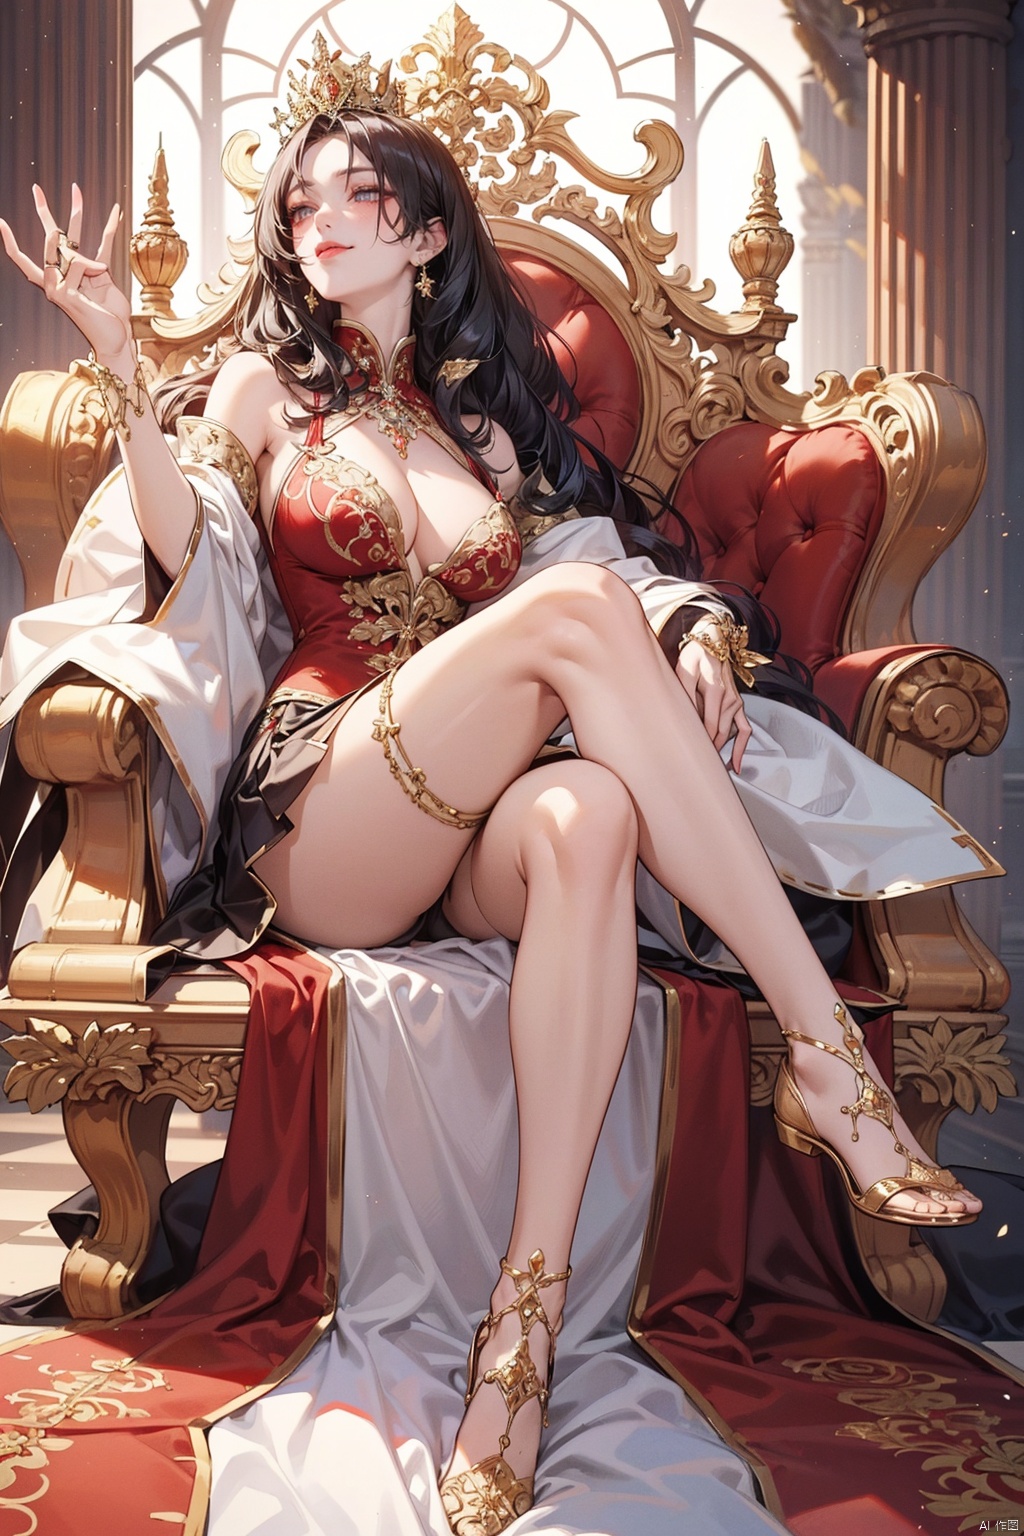 &quot;In a sensual throne scene, the anime-style Queen, seductively aged 35, sits majestically on her ornate golden throne, surrounded by towering marble columns and a rich tapestry of royal heritage, wearing a luxurious crimson velvet The gown hugged her curves, revealing a plunging neckline and thigh-high slit that accentuated her statuesque figure. The skirt was embellished with intricate gold embroidery and bejeweled embellishments, her legs were crossed, and her long scarlet hair was styled in a big The wavy form hangs down from her back, on the luxurious velvet footstool, ((majestic posture)), the majestic gaze, and the seductive smile, embodying the irresistible temptation and unyielding power of the king.&quot;